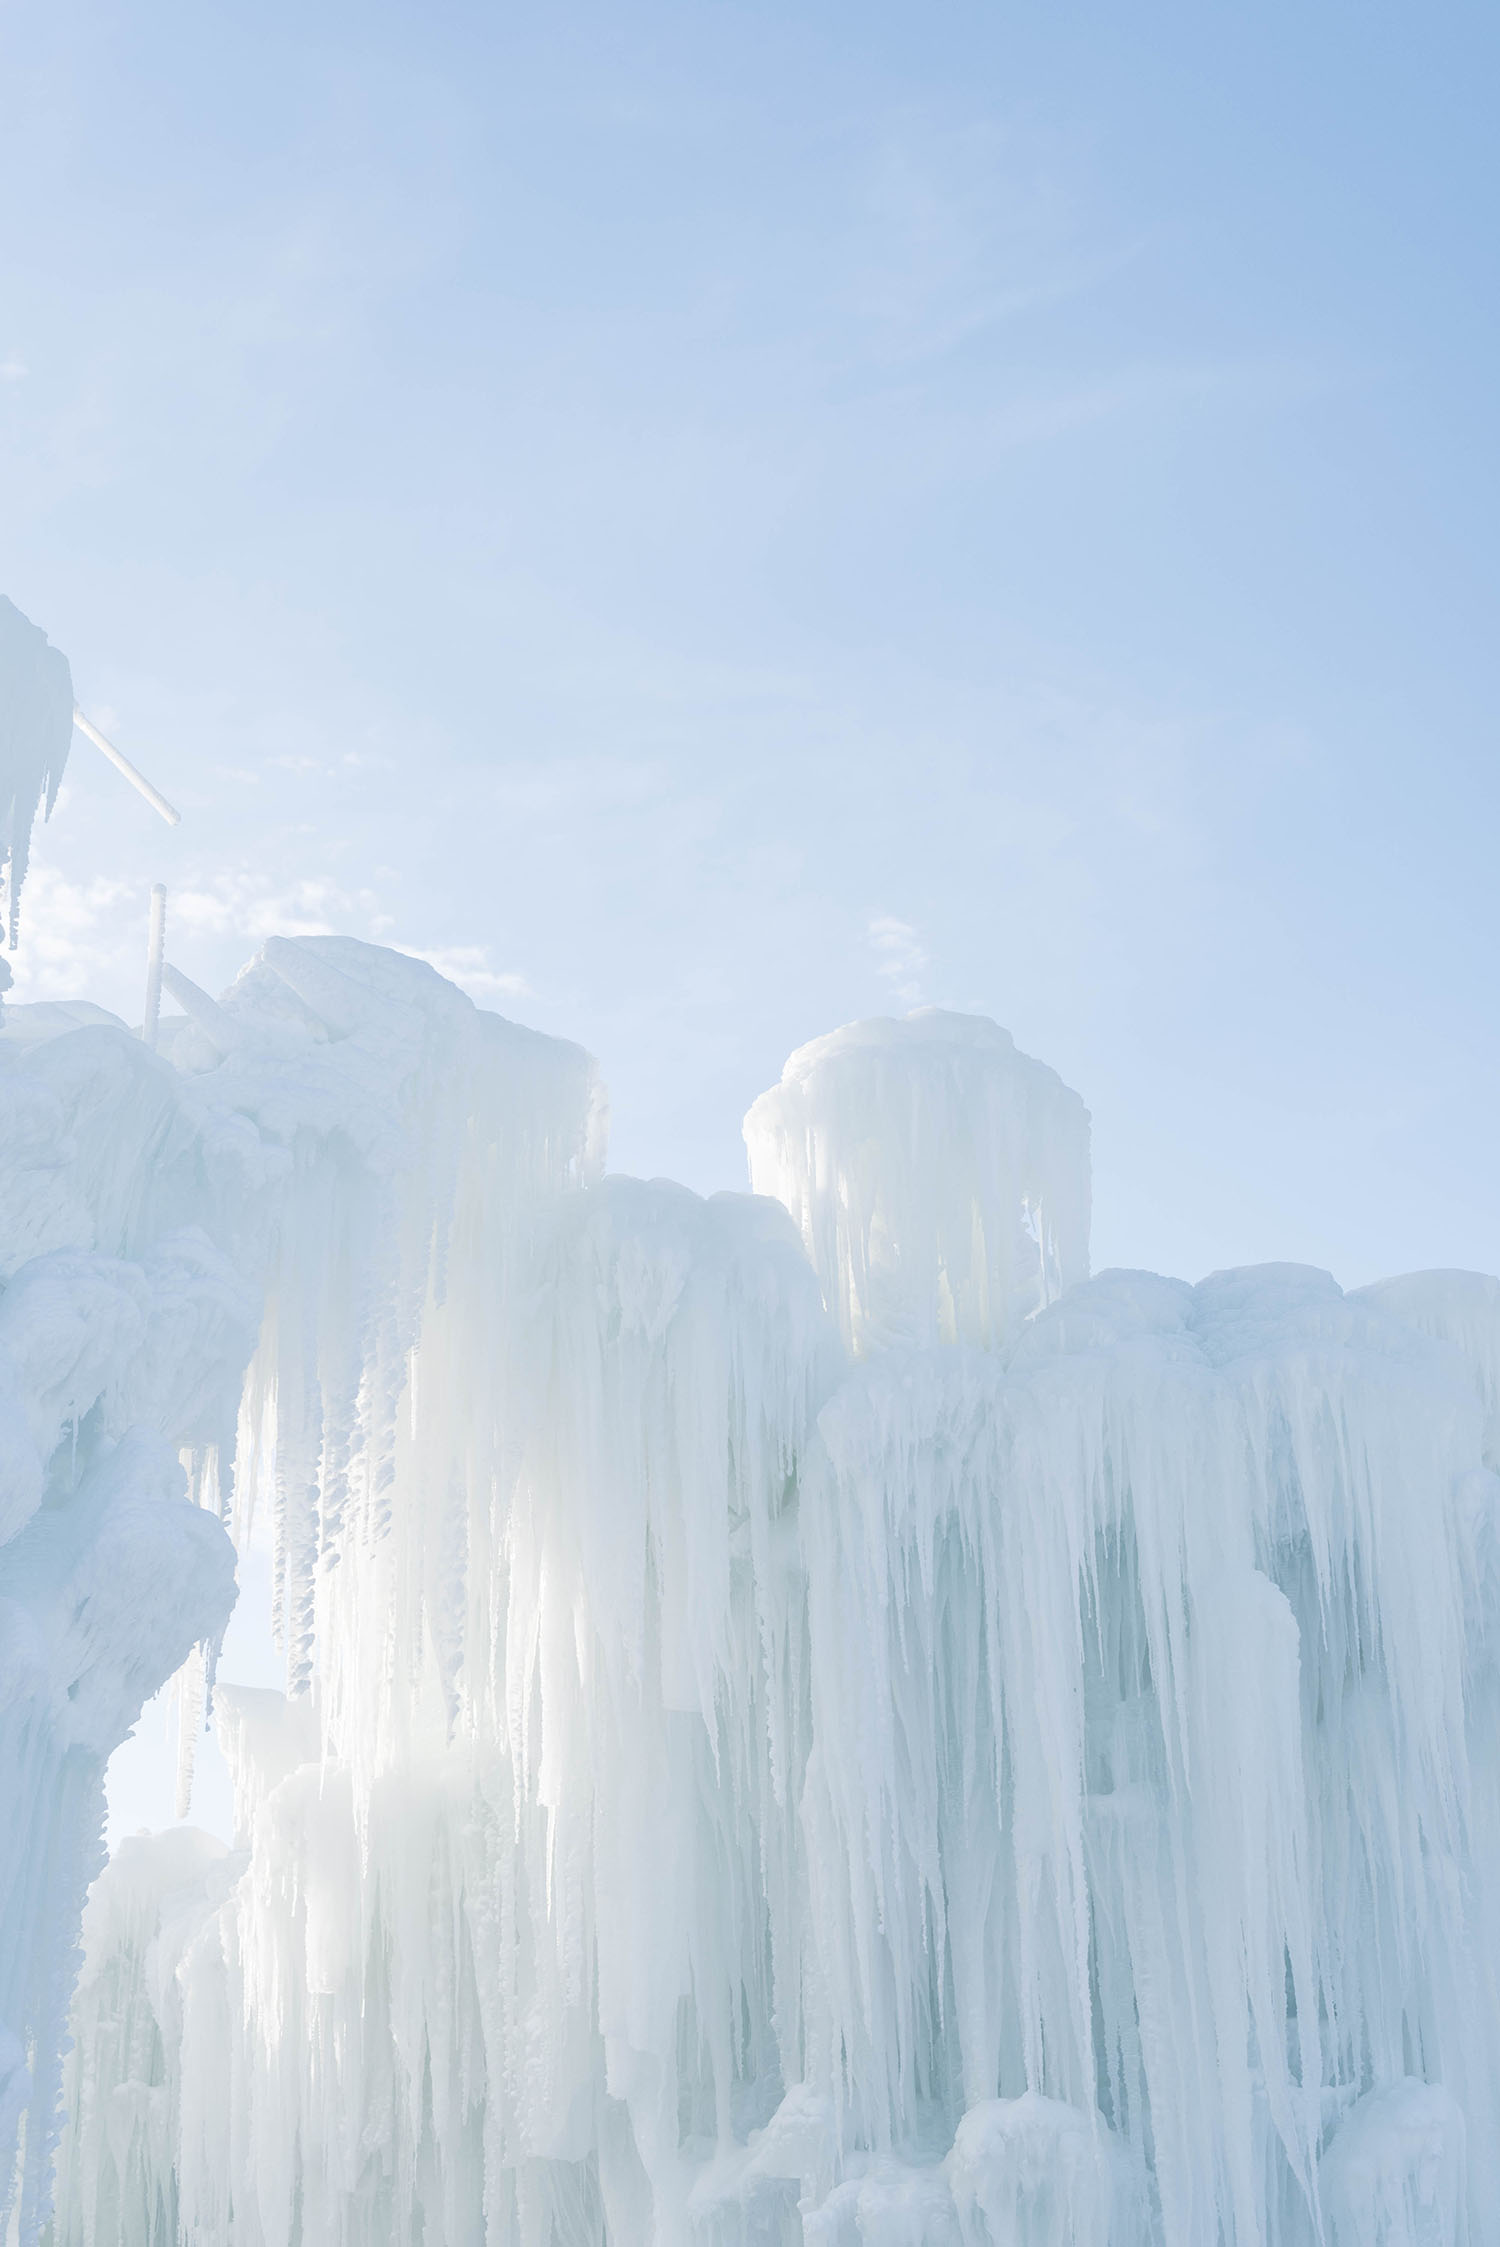 Sun shines through pillars of ice at Ice Castles in Winnipeg, as photographed by trop travel blogger Cee Fardoe of Coco & Vera